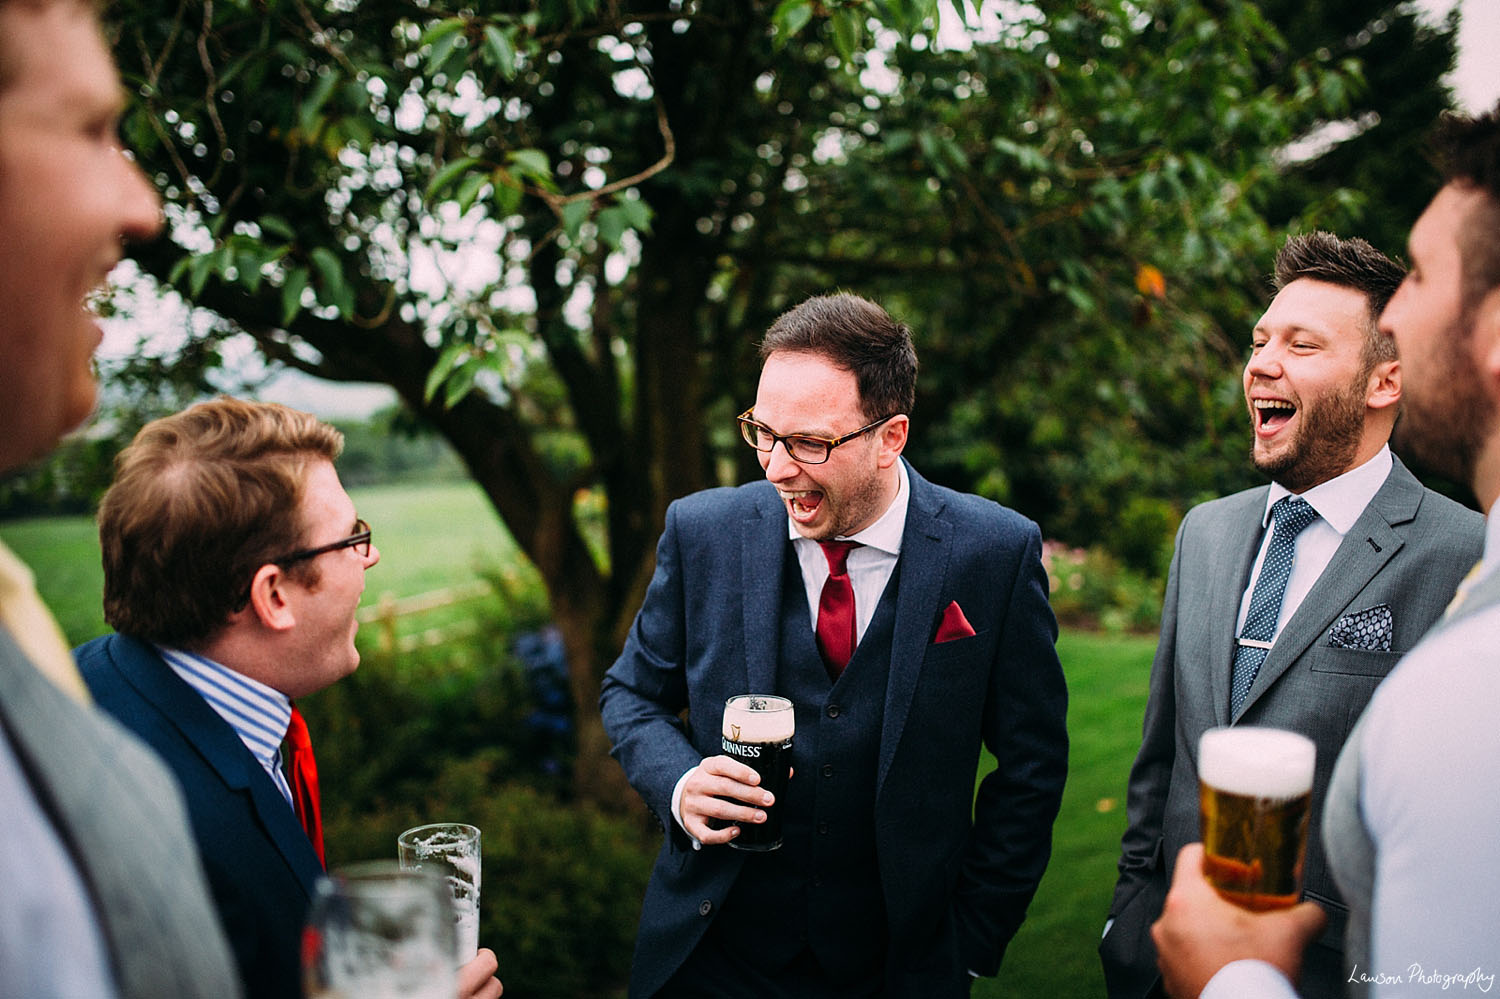 Michelle & James' Wedding at The Shireburn Arms | Lawson Photography